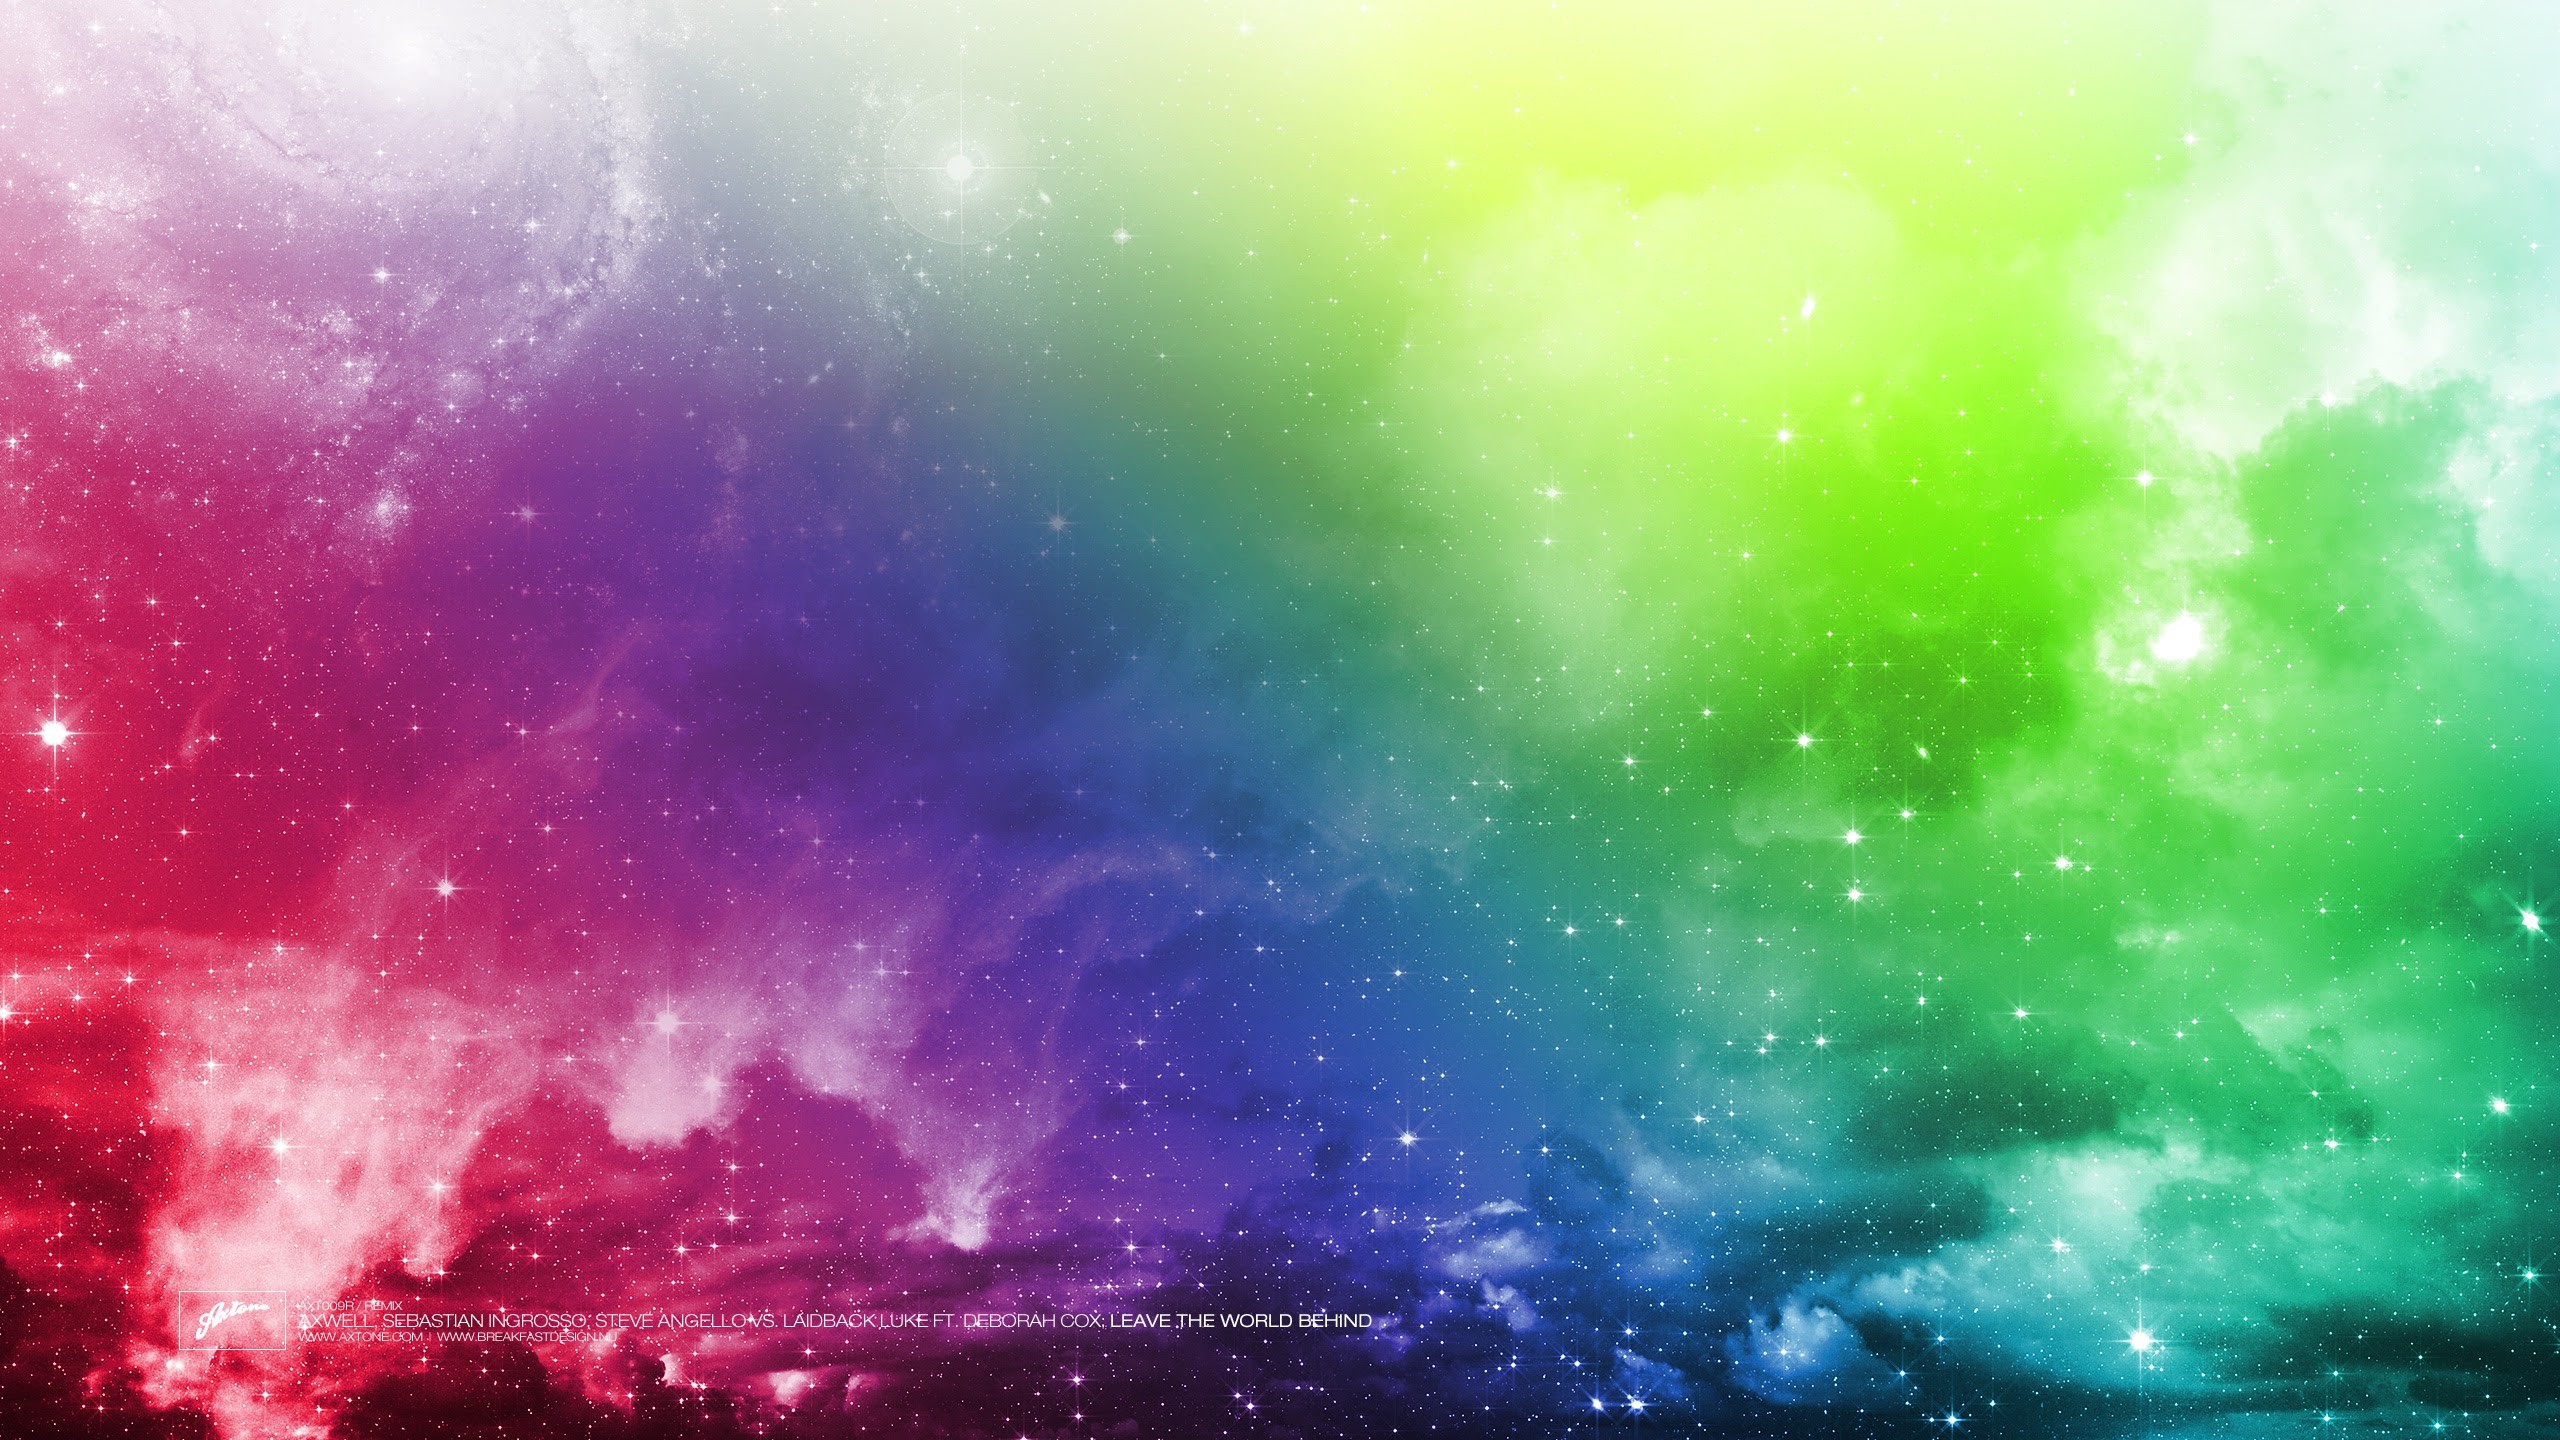 General 2560x1440 Axtone album covers colorful stars sky